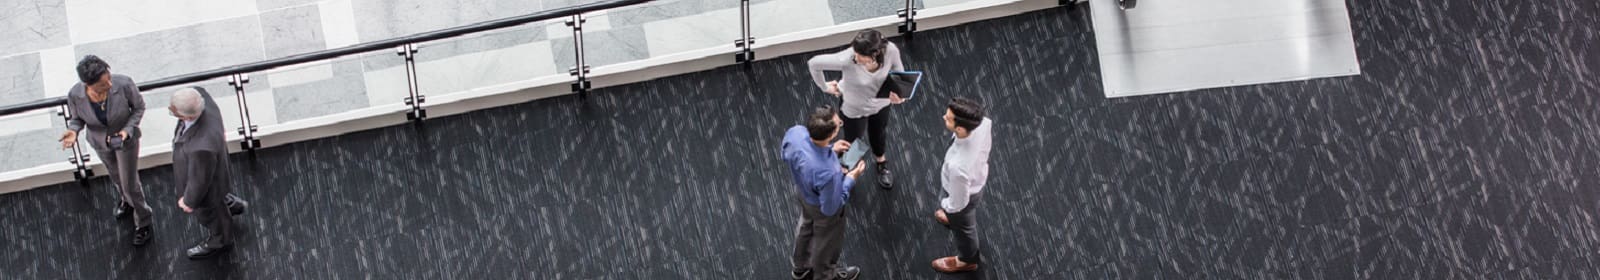 Employees chat on an elevated walkway in an office building